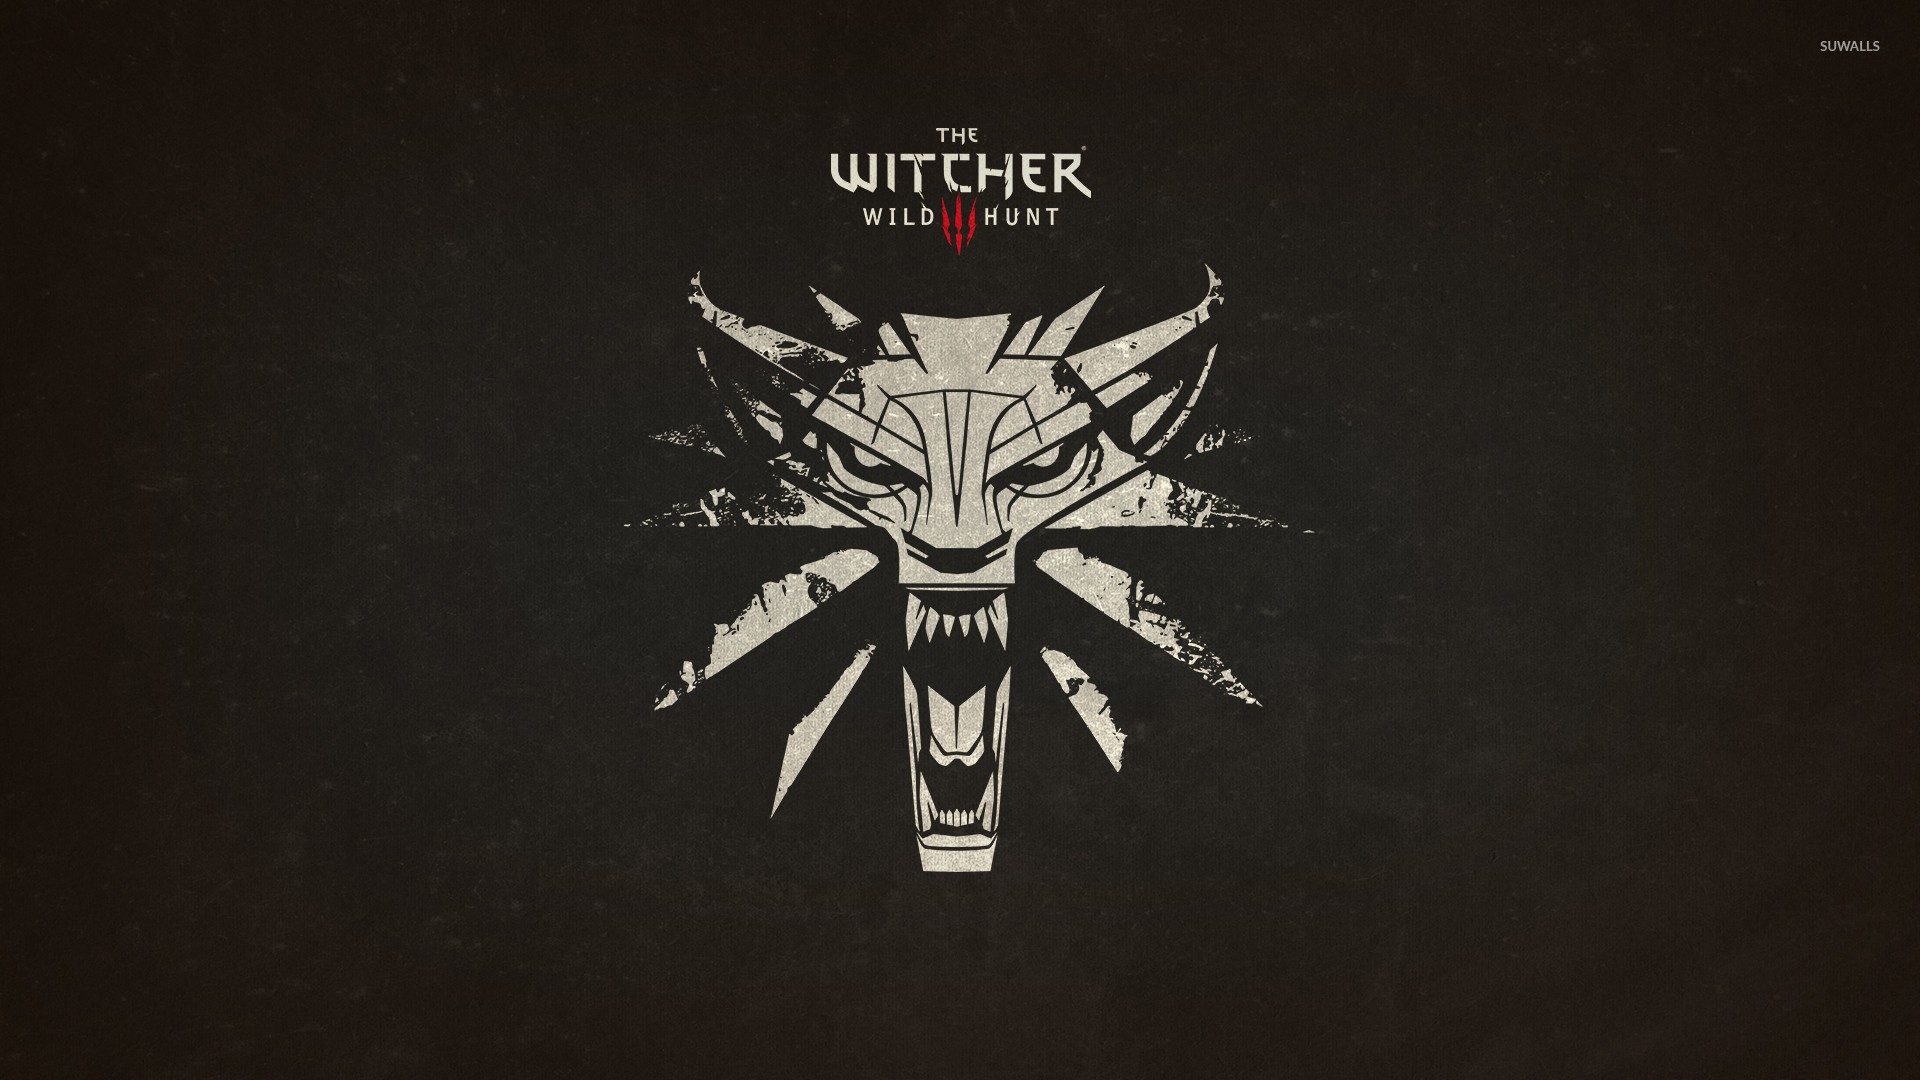 HD Wallpaper The Witcher with high-resolution 1920x1080 pixel. You can use this wallpaper for your Desktop Computer Backgrounds, Mac Wallpapers, Android Lock screen or iPhone Screensavers and another smartphone device